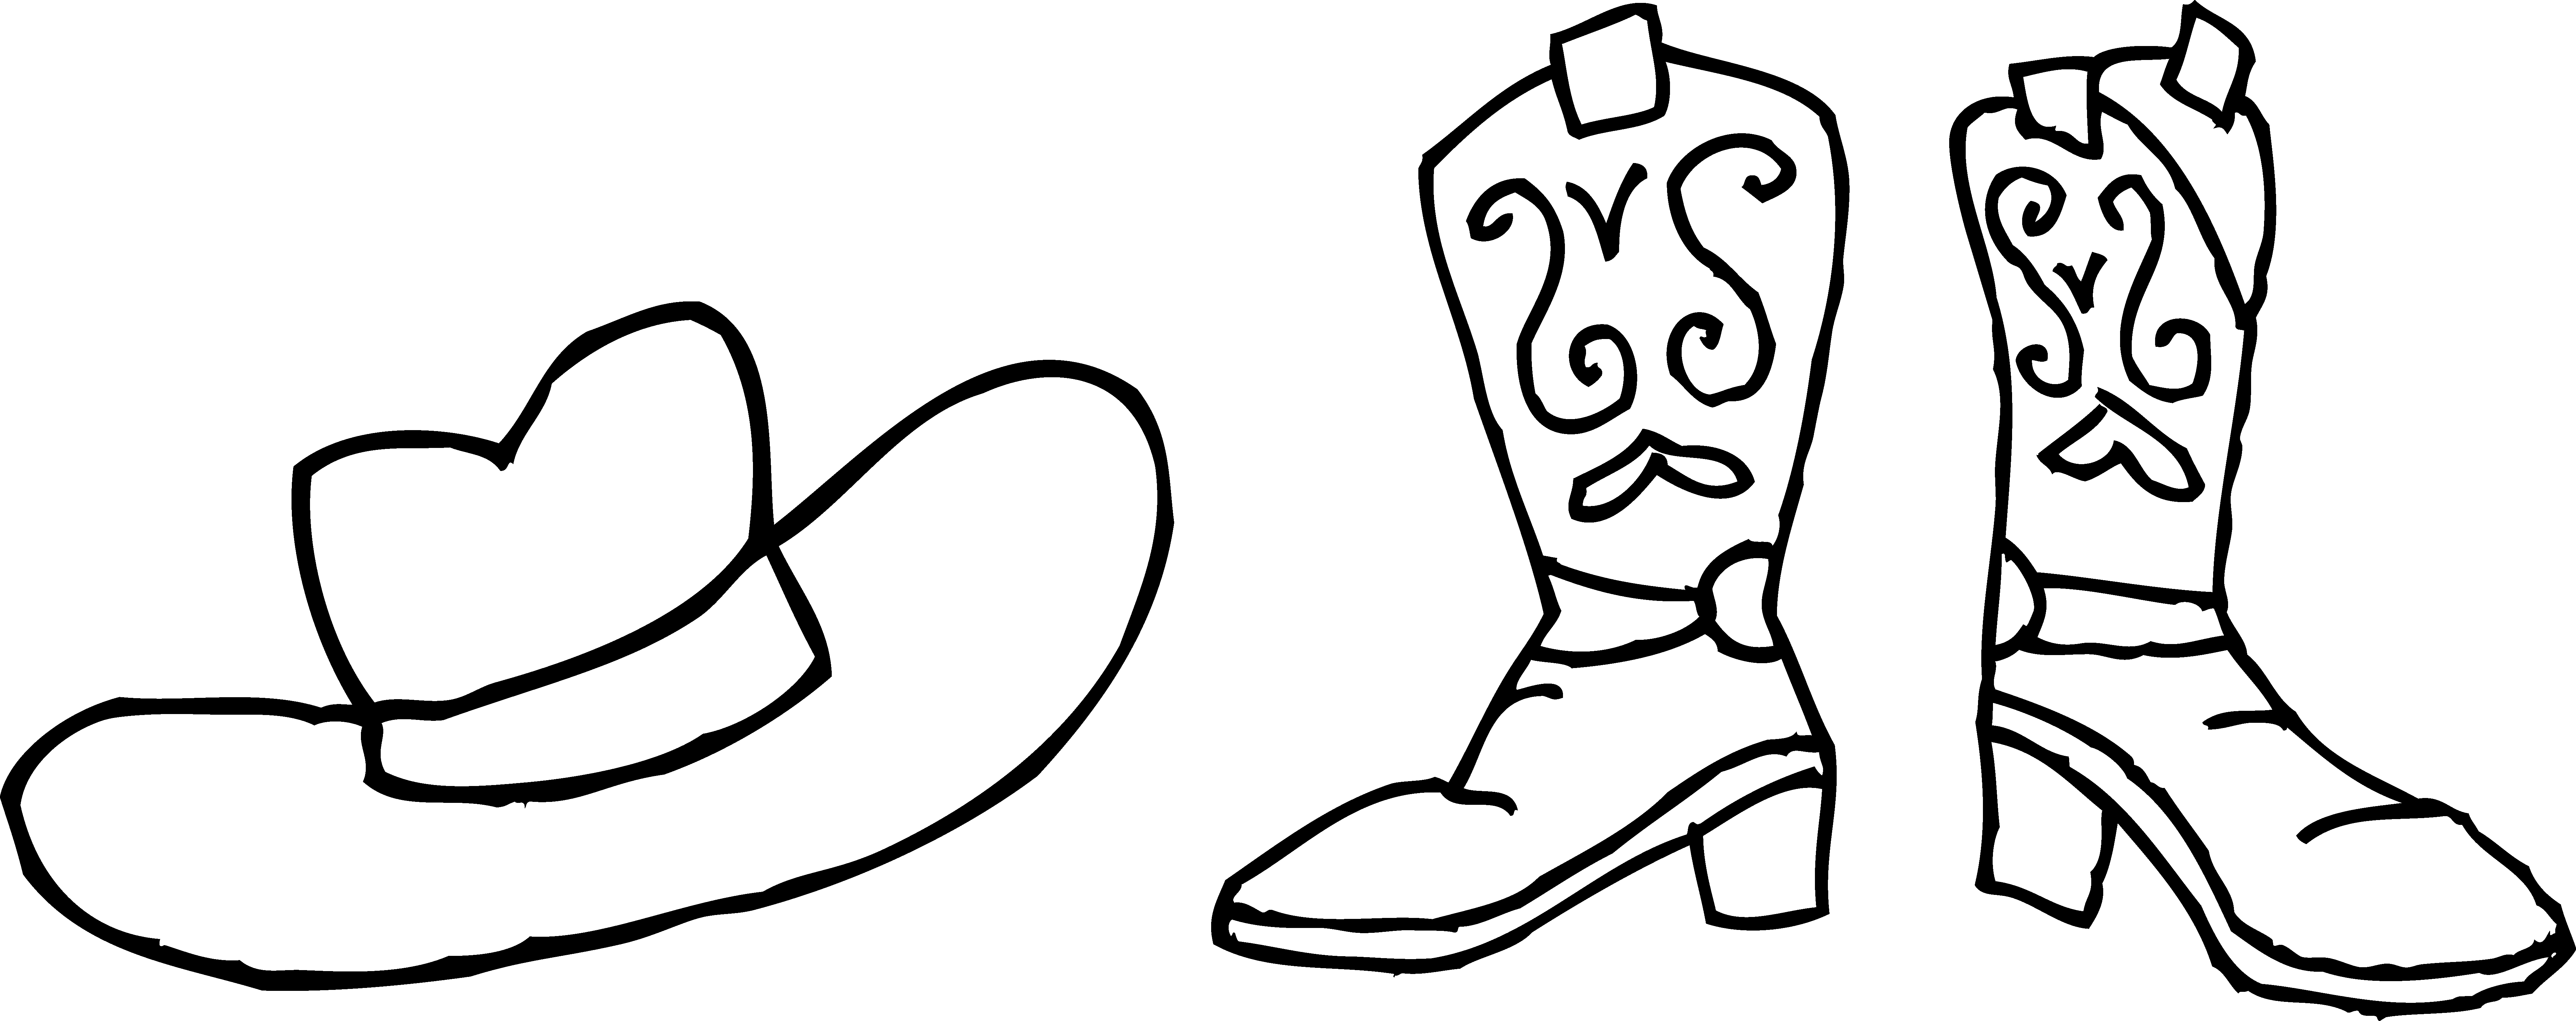 Cowgirl clipart black and white. Cowboy boots panda free